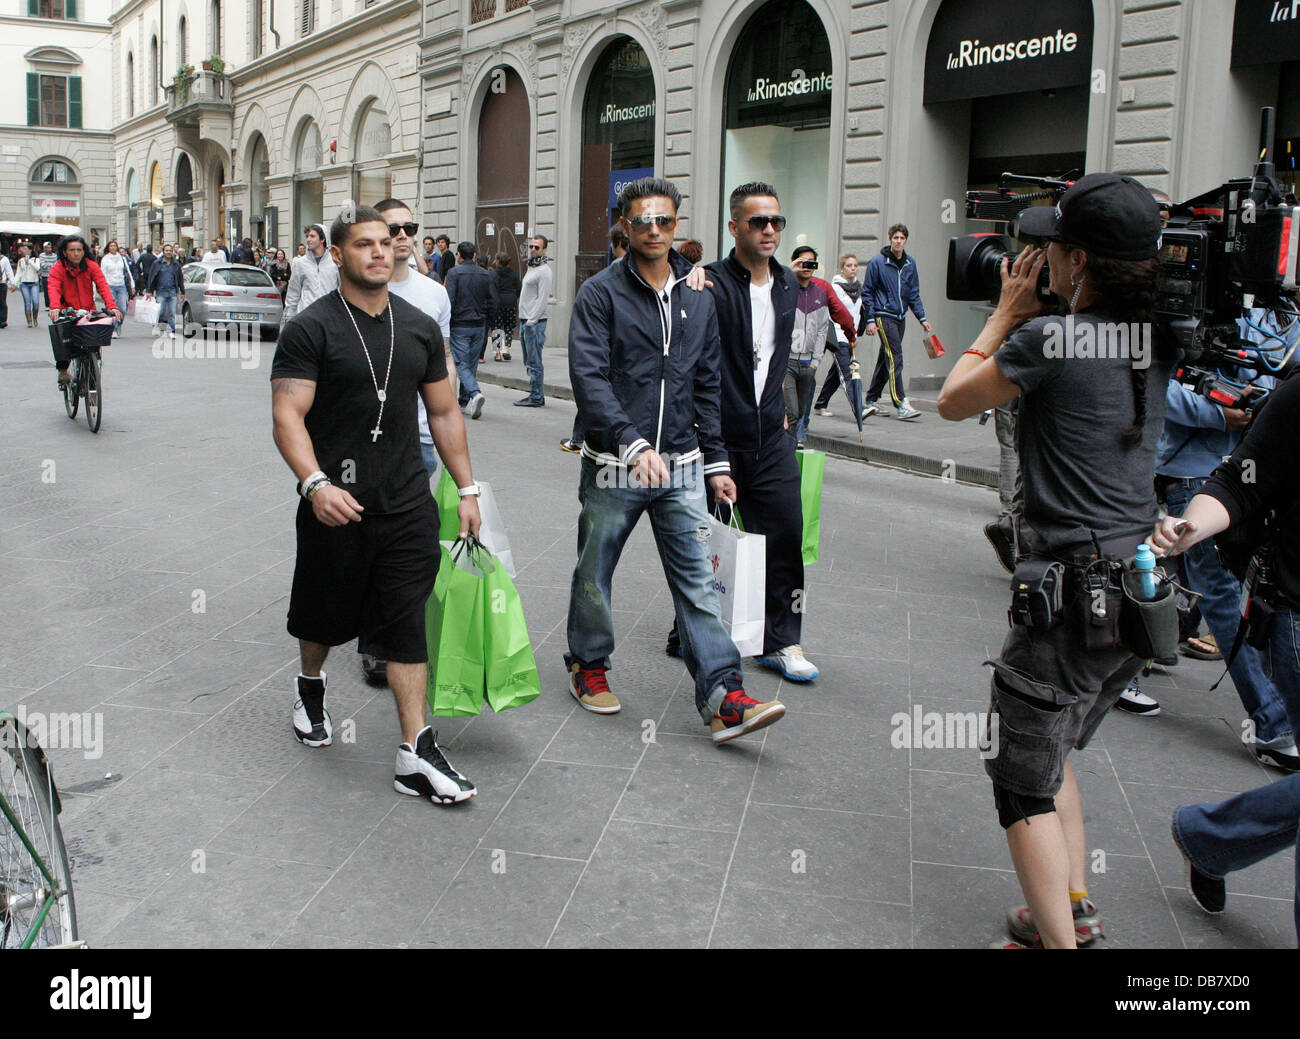 Ronnie Ortiz-Magro, Vinny Guadagnino , DJ Pauly D and Mike 'The Situation' Sorrentino  shopping in Florence while filming the reality show 'Jersey Shore' Florence, Italy - 15.05.11 Stock Photo